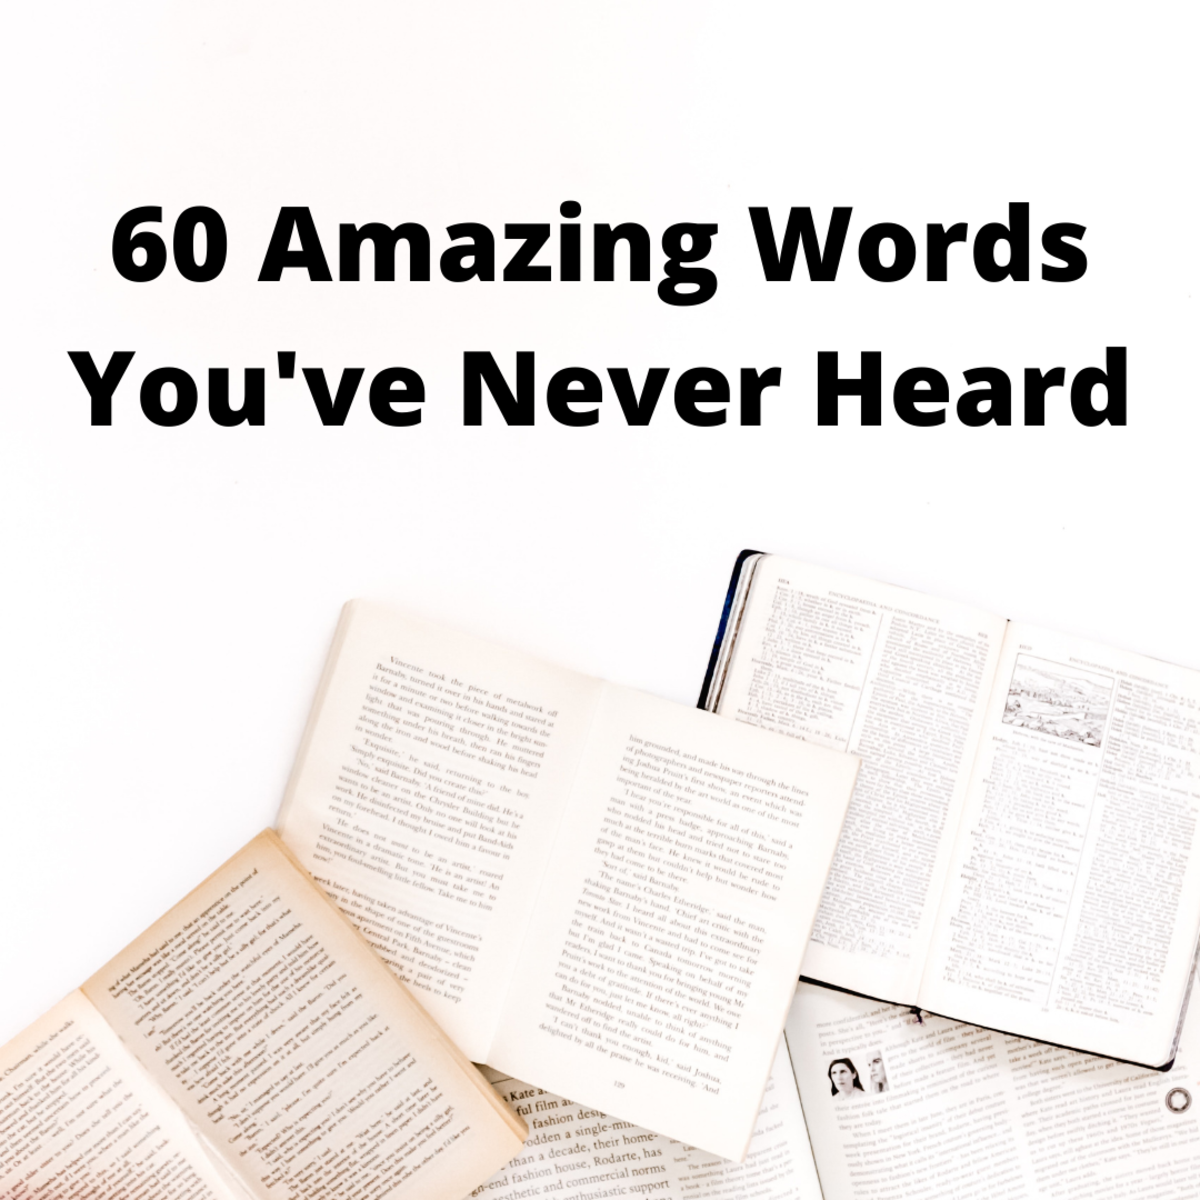 In this article, you'll learn 60+ words you've never heard of. If you need to win a game of Scrabble or need help finding the perfect word for your short story, this list is for you! Each word is further explained by being placed in a sentence.